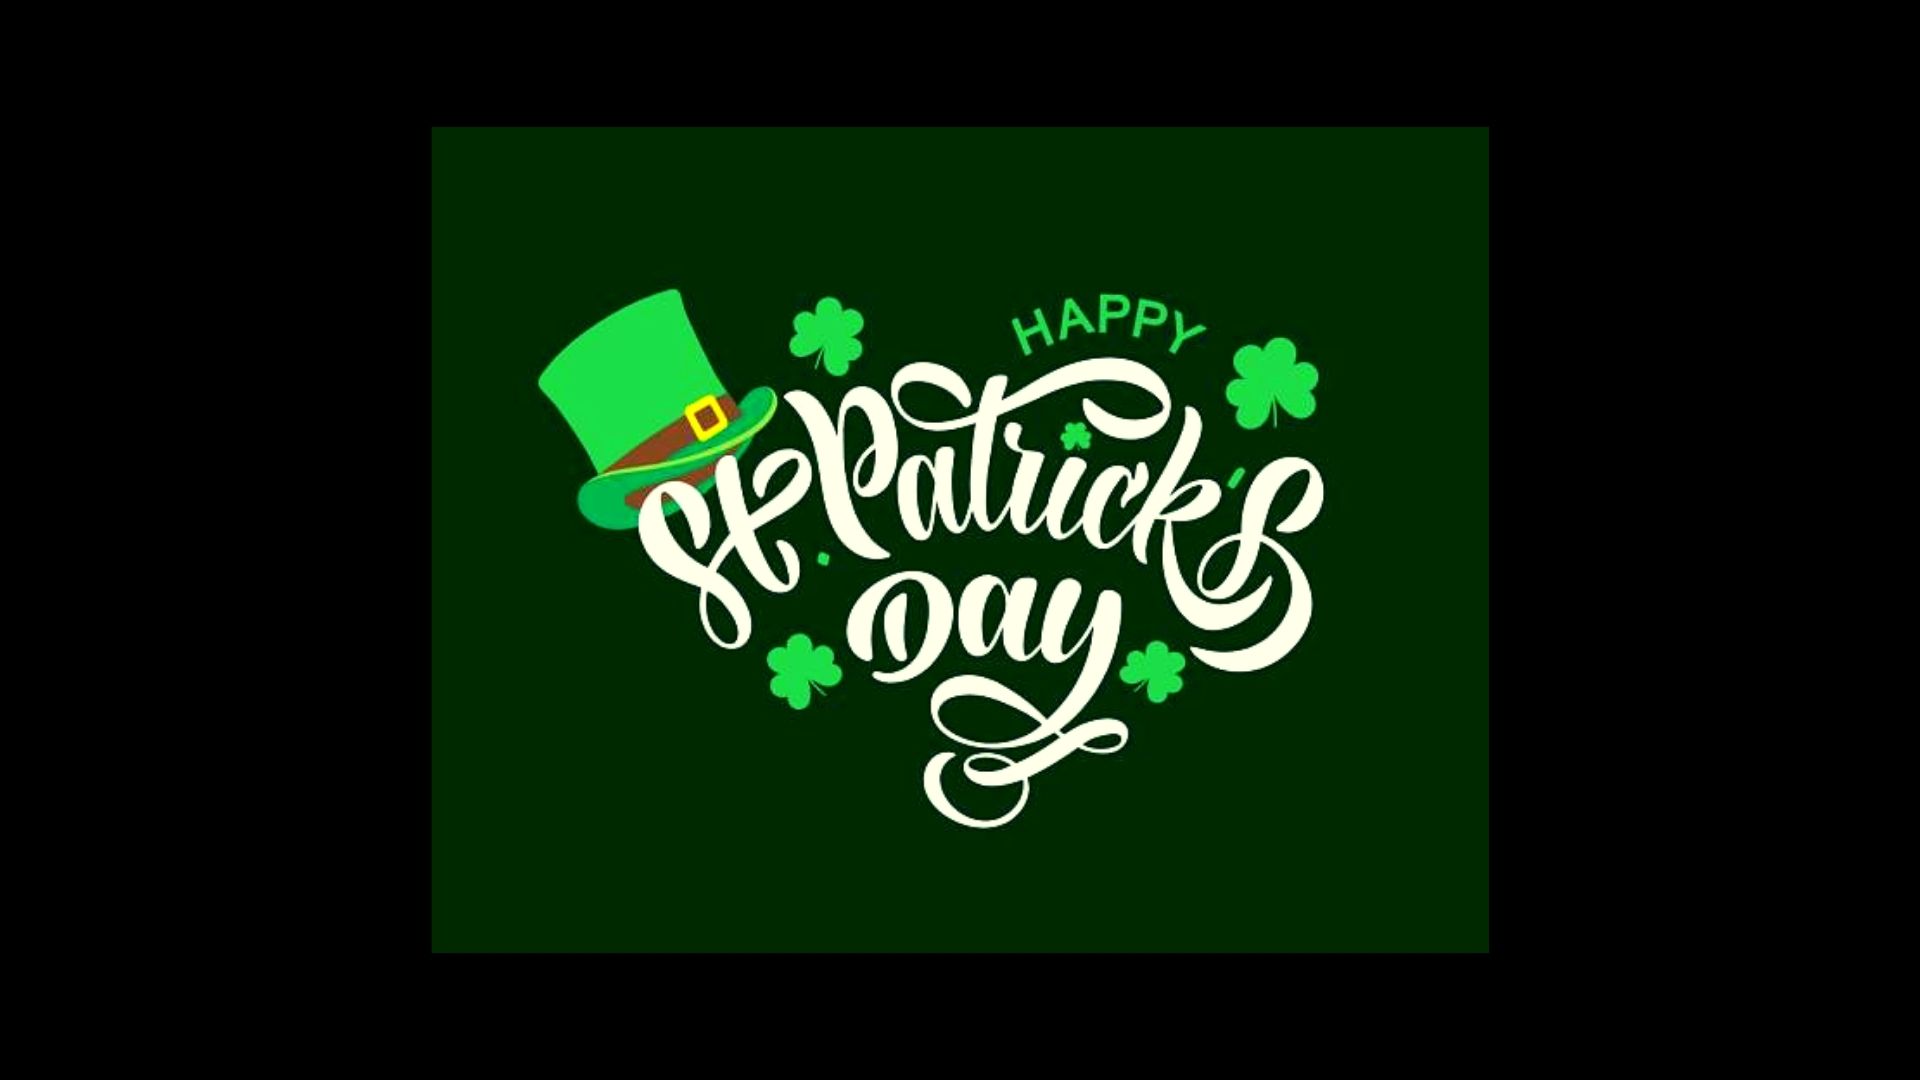 Happy St Patricks Day 2022 Wishes | What to Write in a St Patricks Day